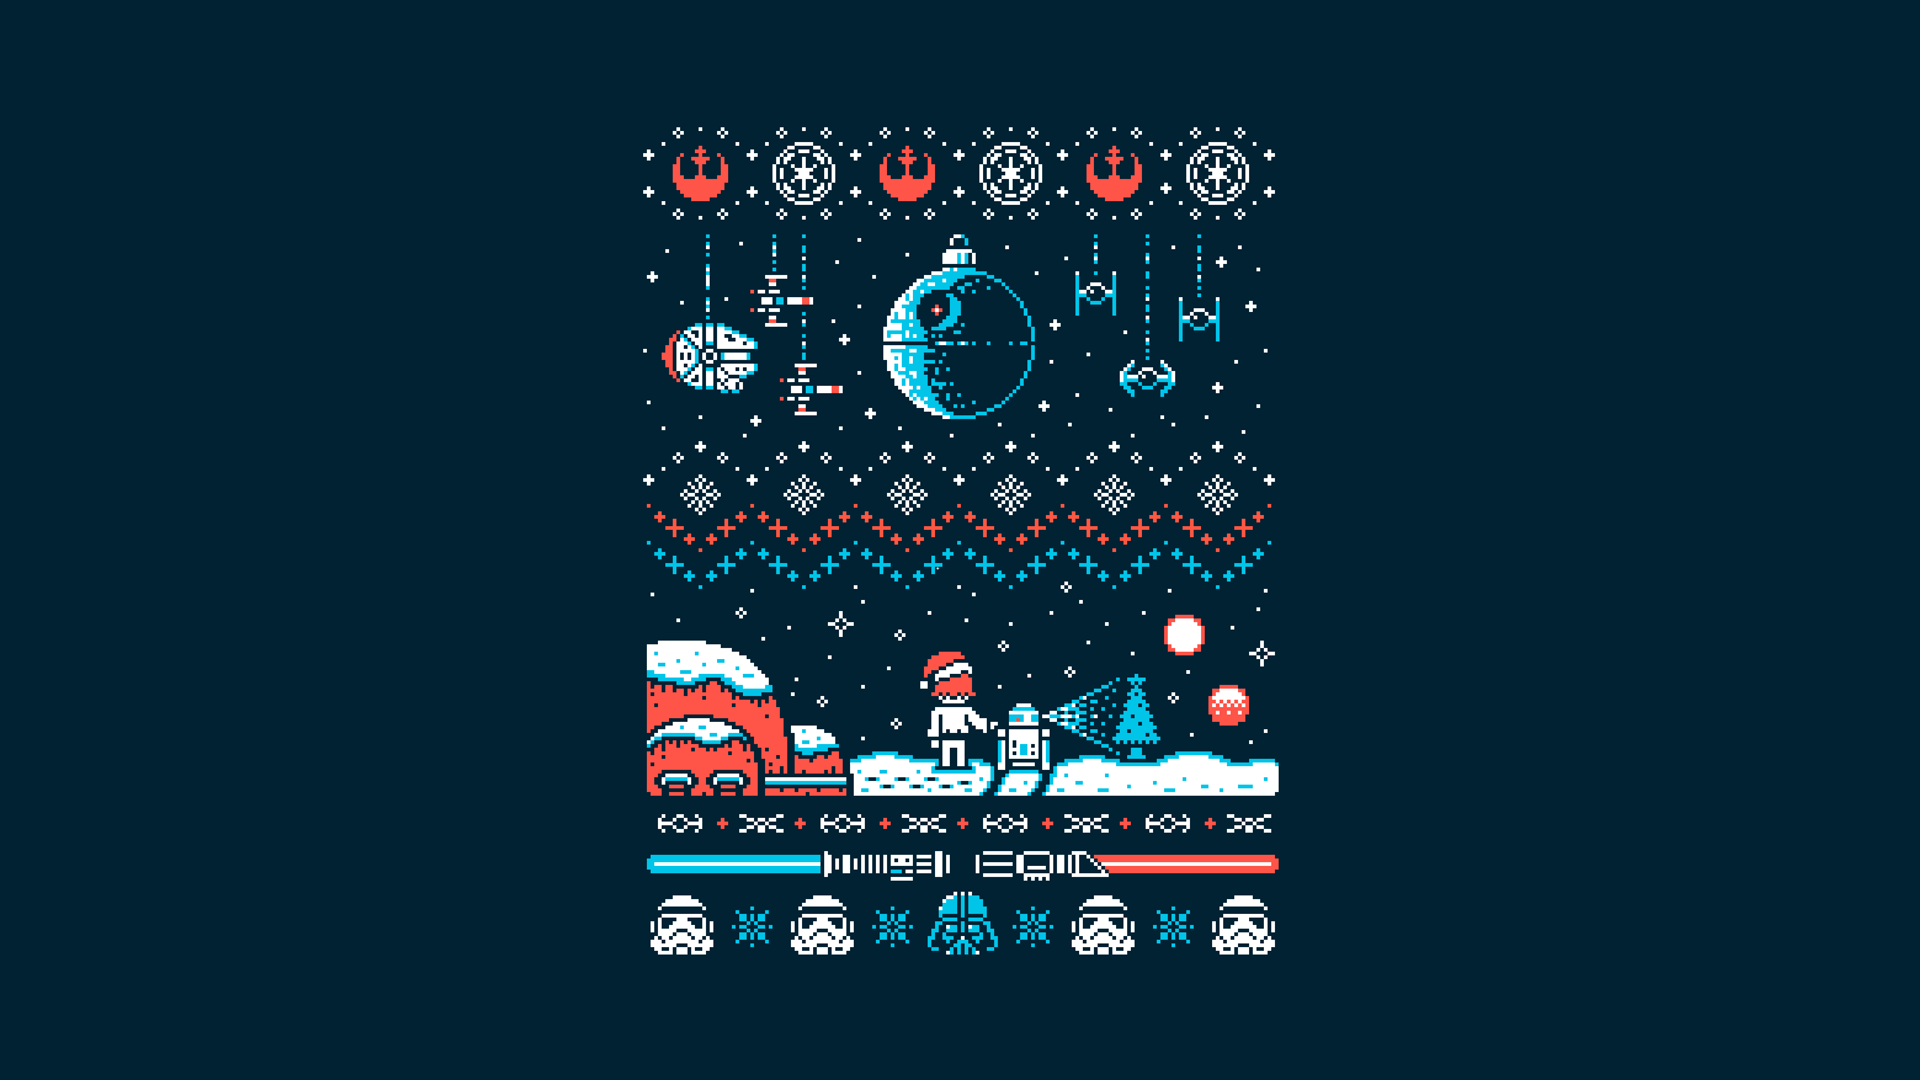 Turned This Star Wars Christmas Sweater Design Into A Wallpaper • R Wallpaper. Star Wars Christmas Sweater, Star Wars Christmas, Christmas Sweaters